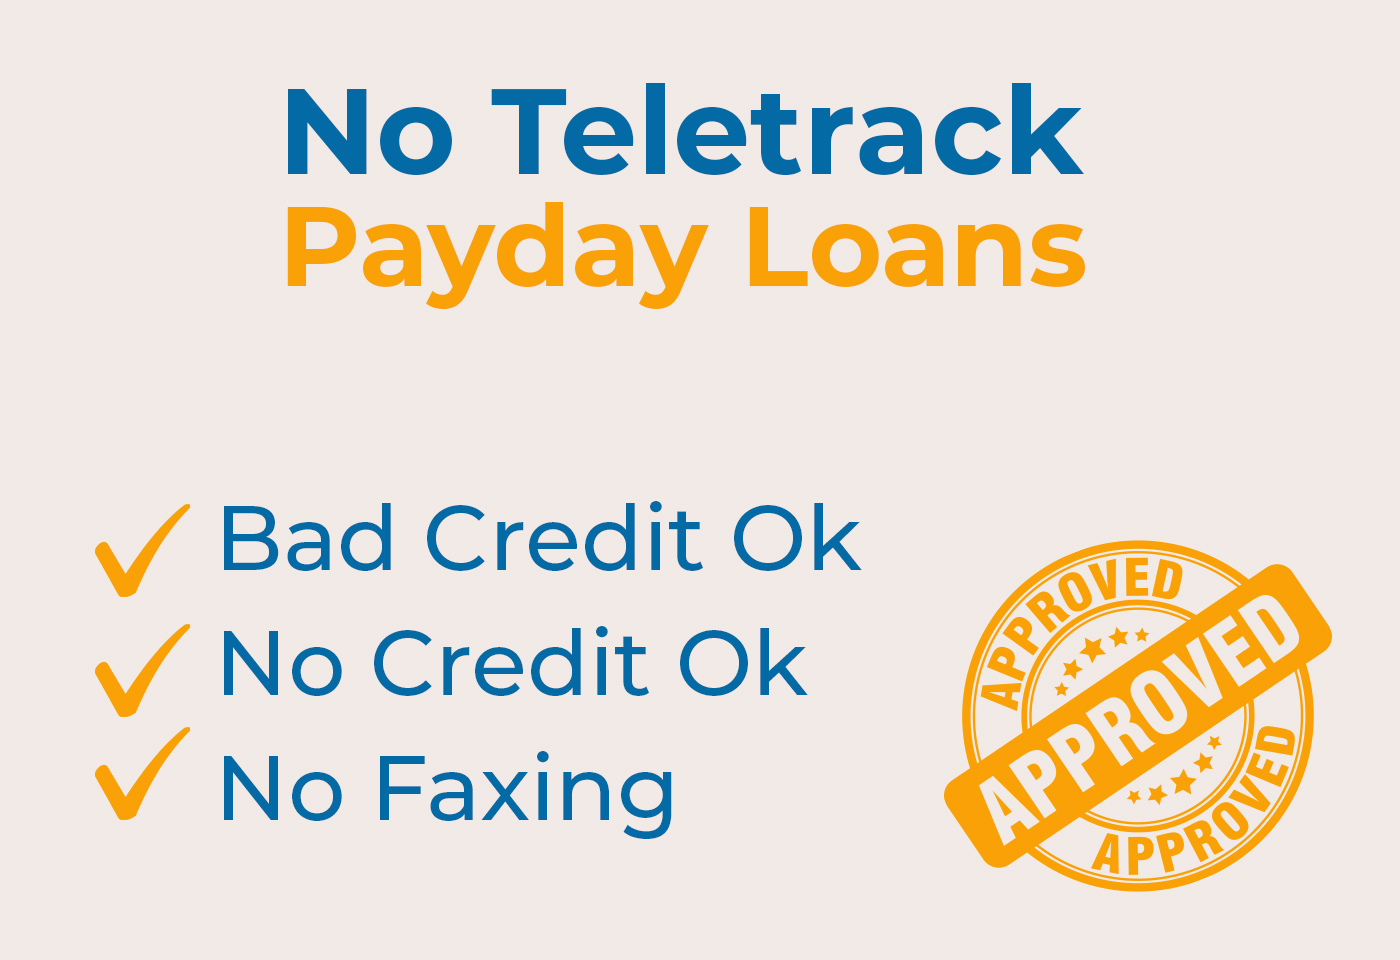 No Teletrack Payday Loans - What Are They? | ShinyLoans